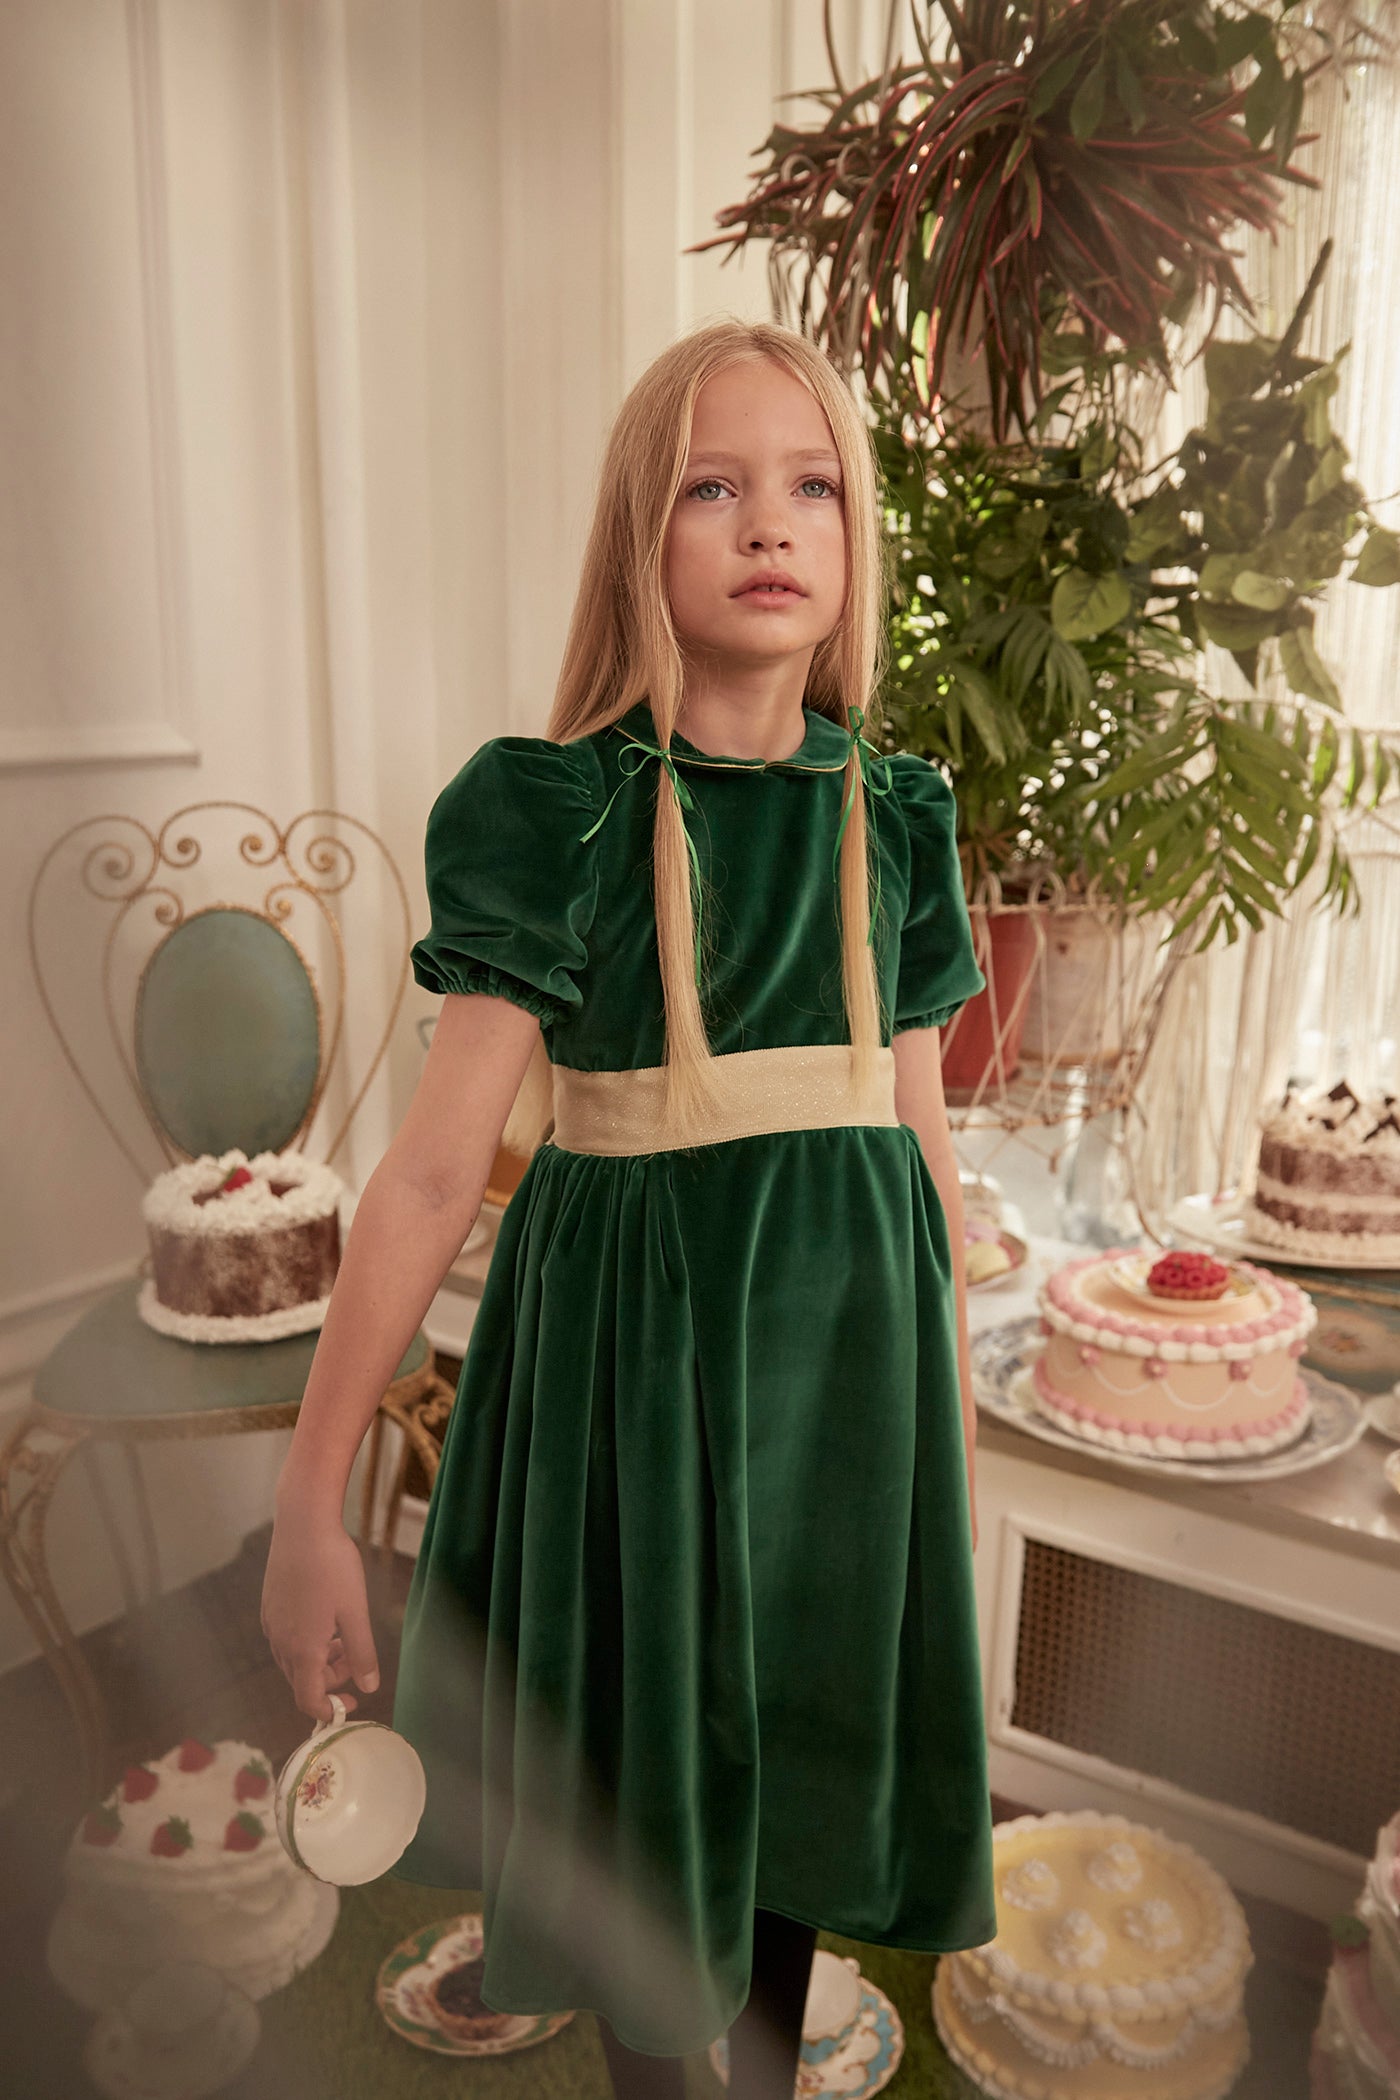 Queen Dress Green Velvet - Occasional Party - Designed by Ingrid Lewis - Strawberries & Cream